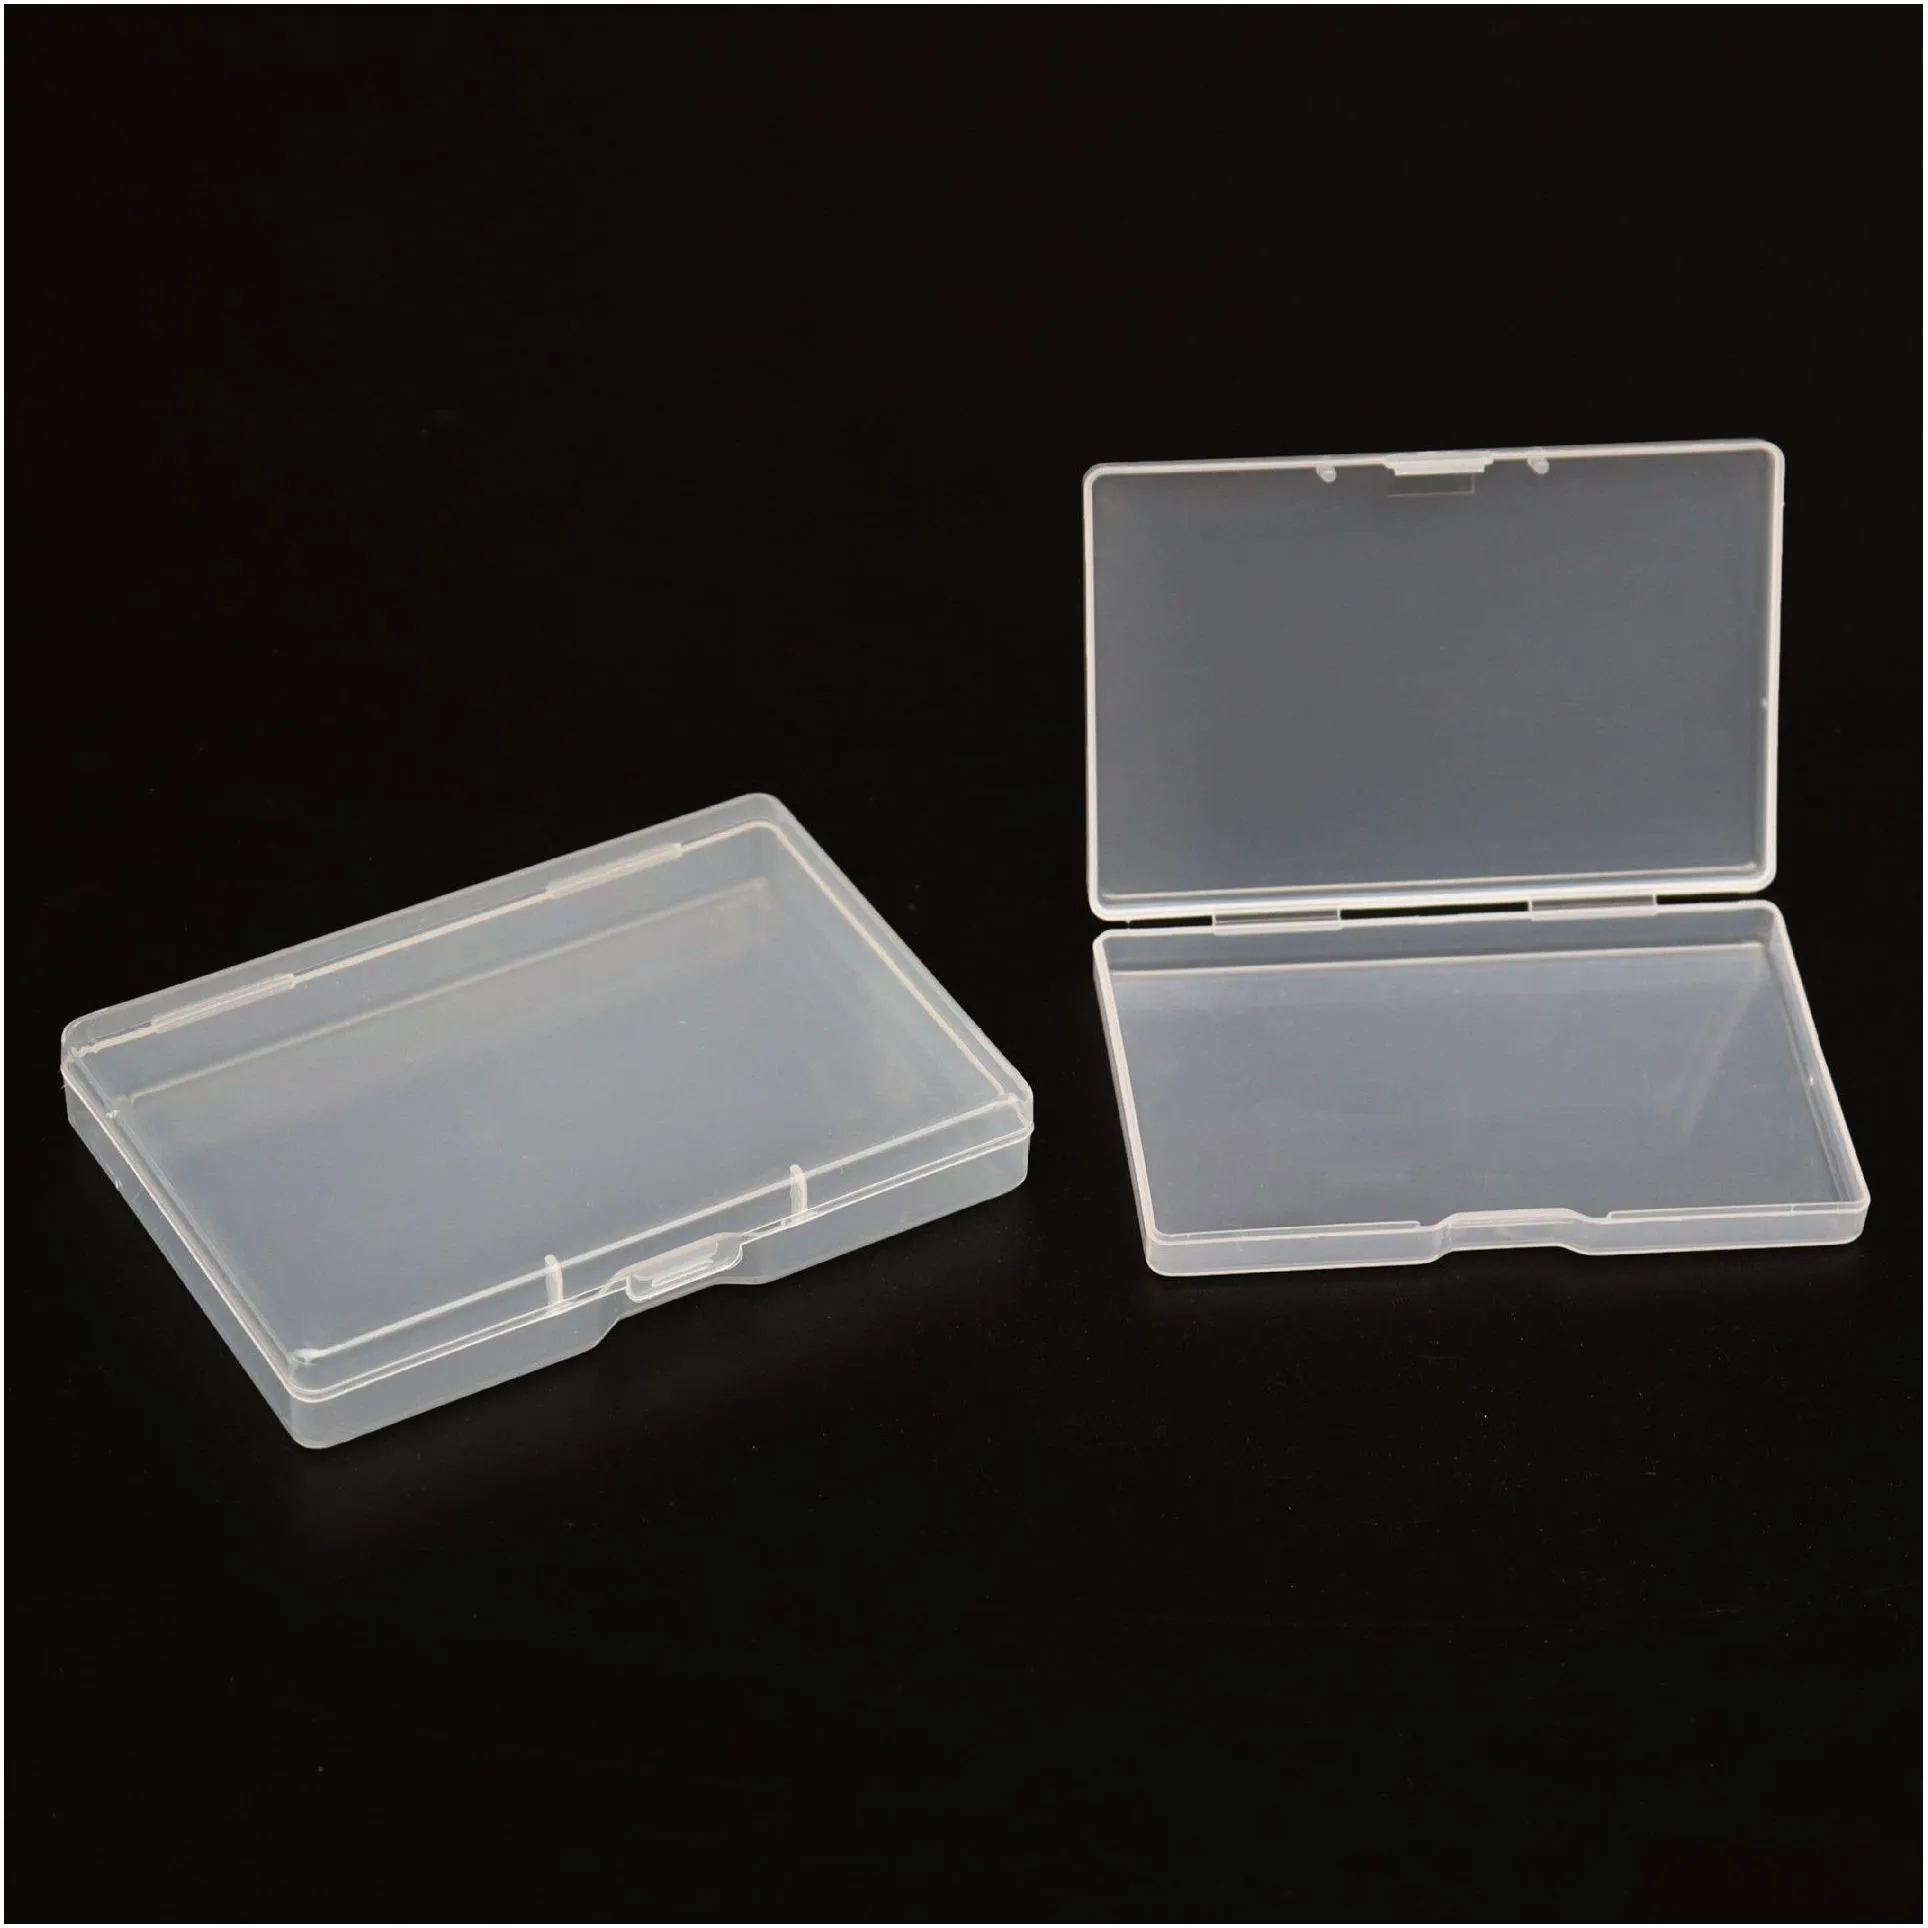 plastic jewelry boxes plastic tool box clear round coin cases container holder organizer storag